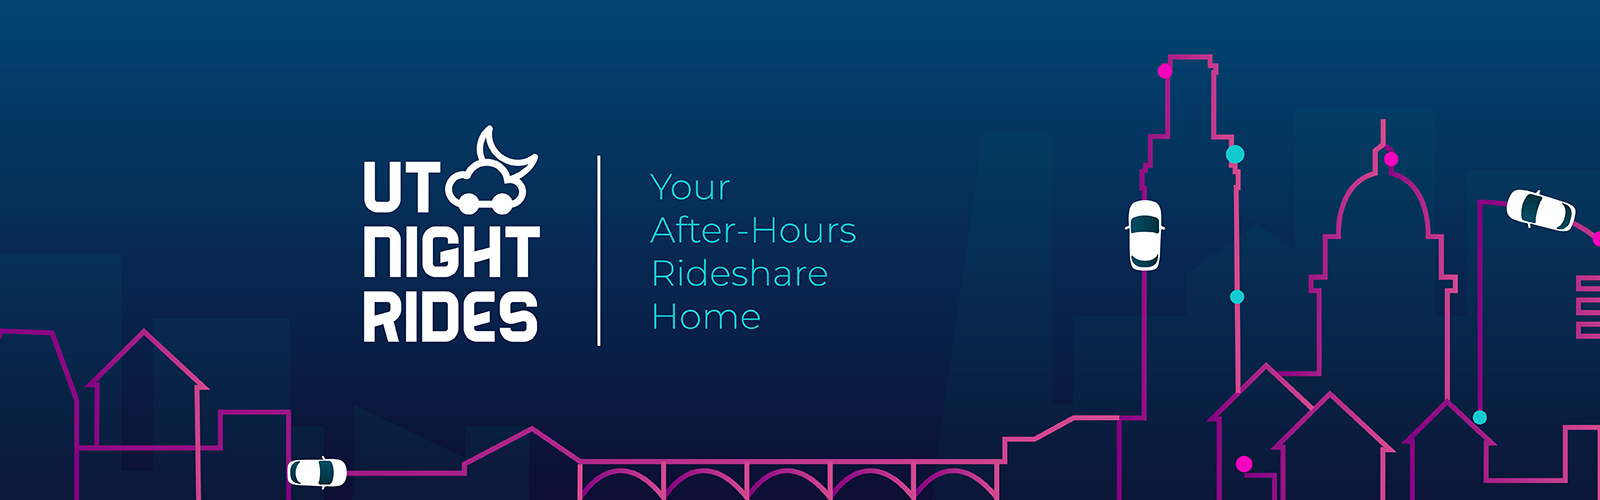 UT Night Rides your after-hours rideshare home 